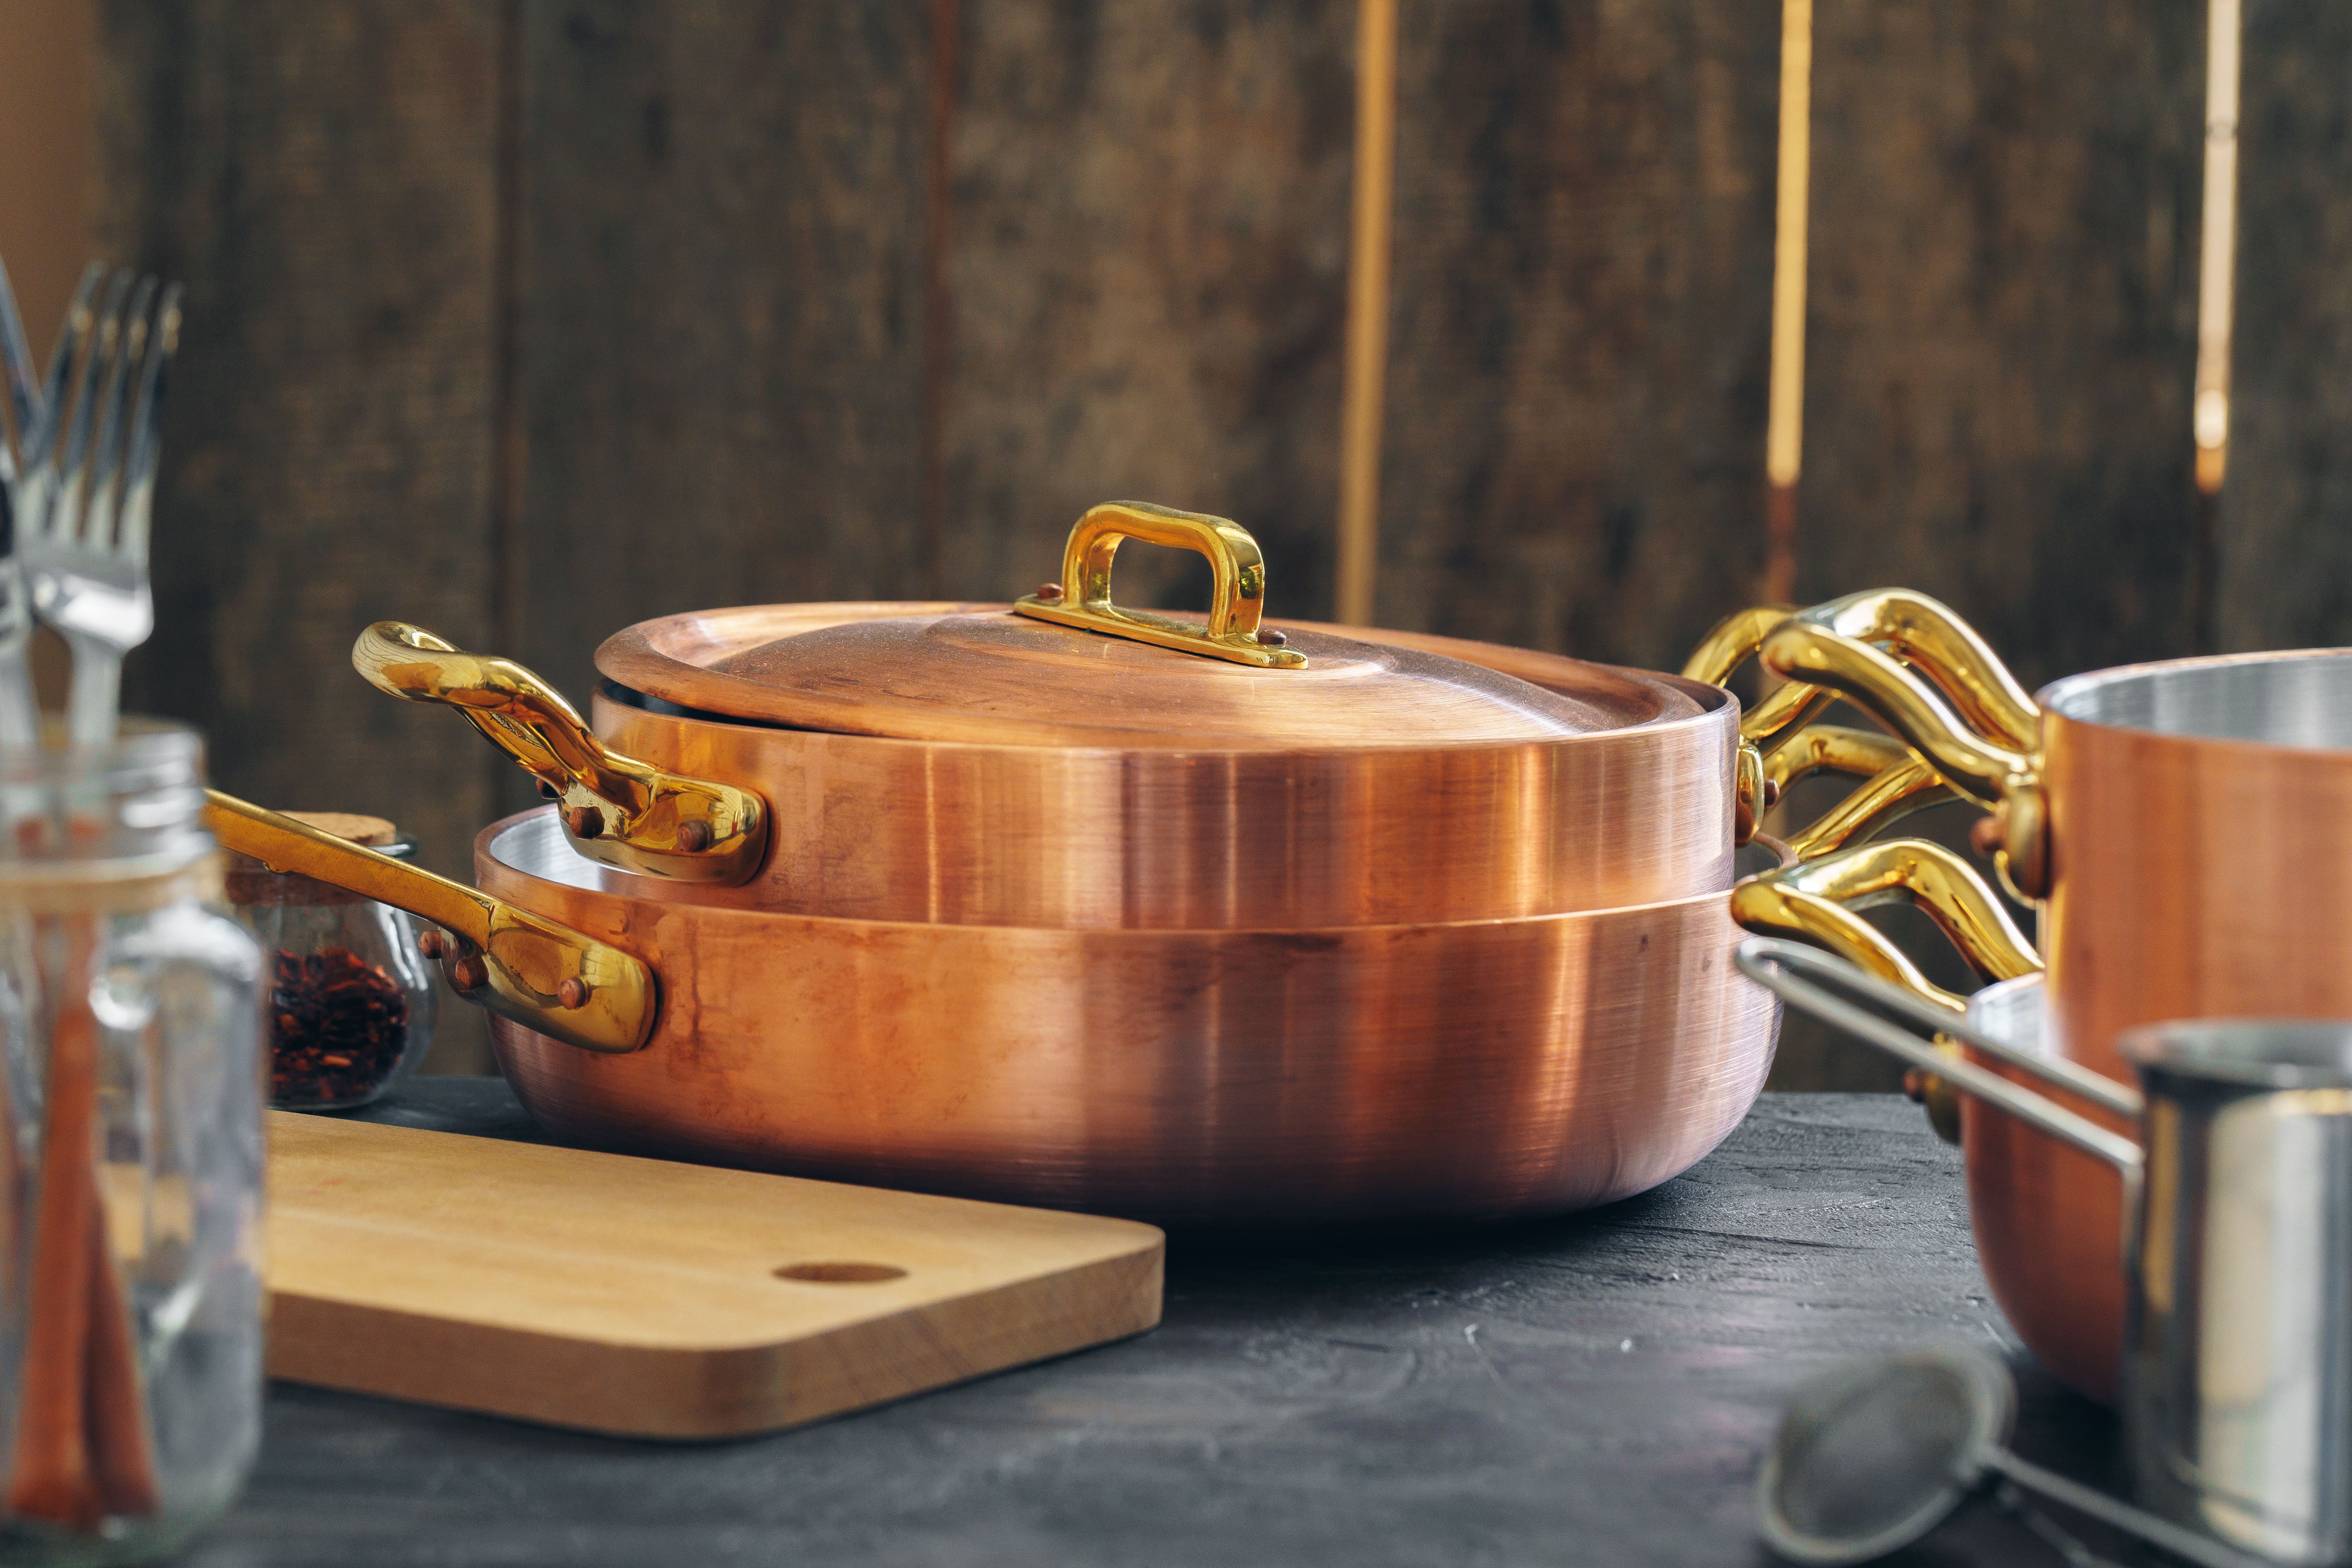 Copper cookware set sitting beside a cutting board and other kitchen utensils